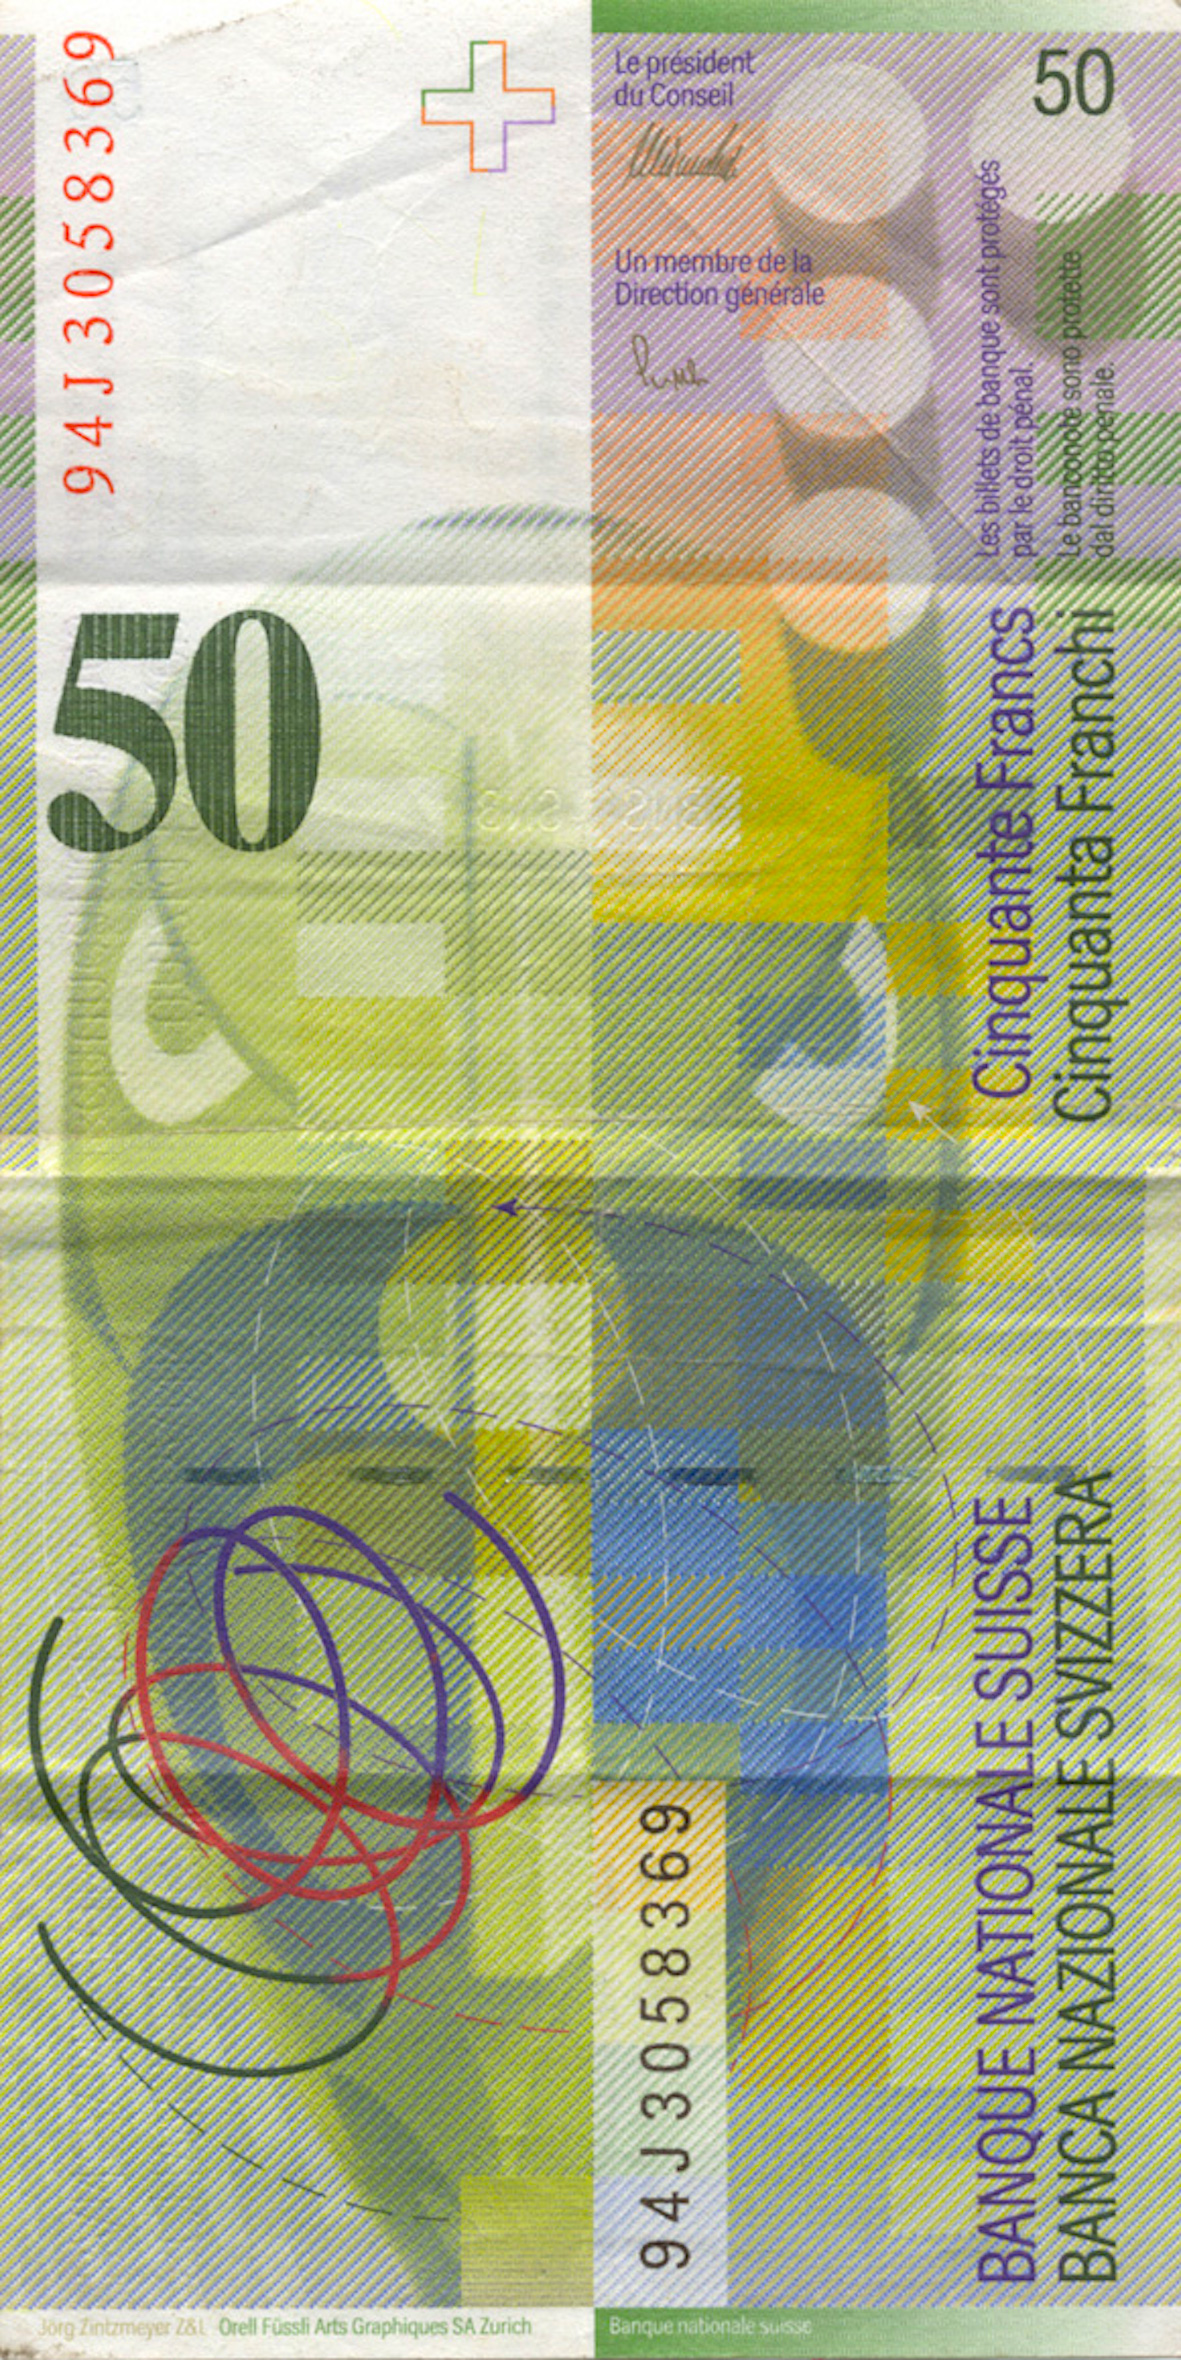 Swiss Confederation, 50 Franks 1980, 8th banknote series, in circulation since 1995 (reverse)